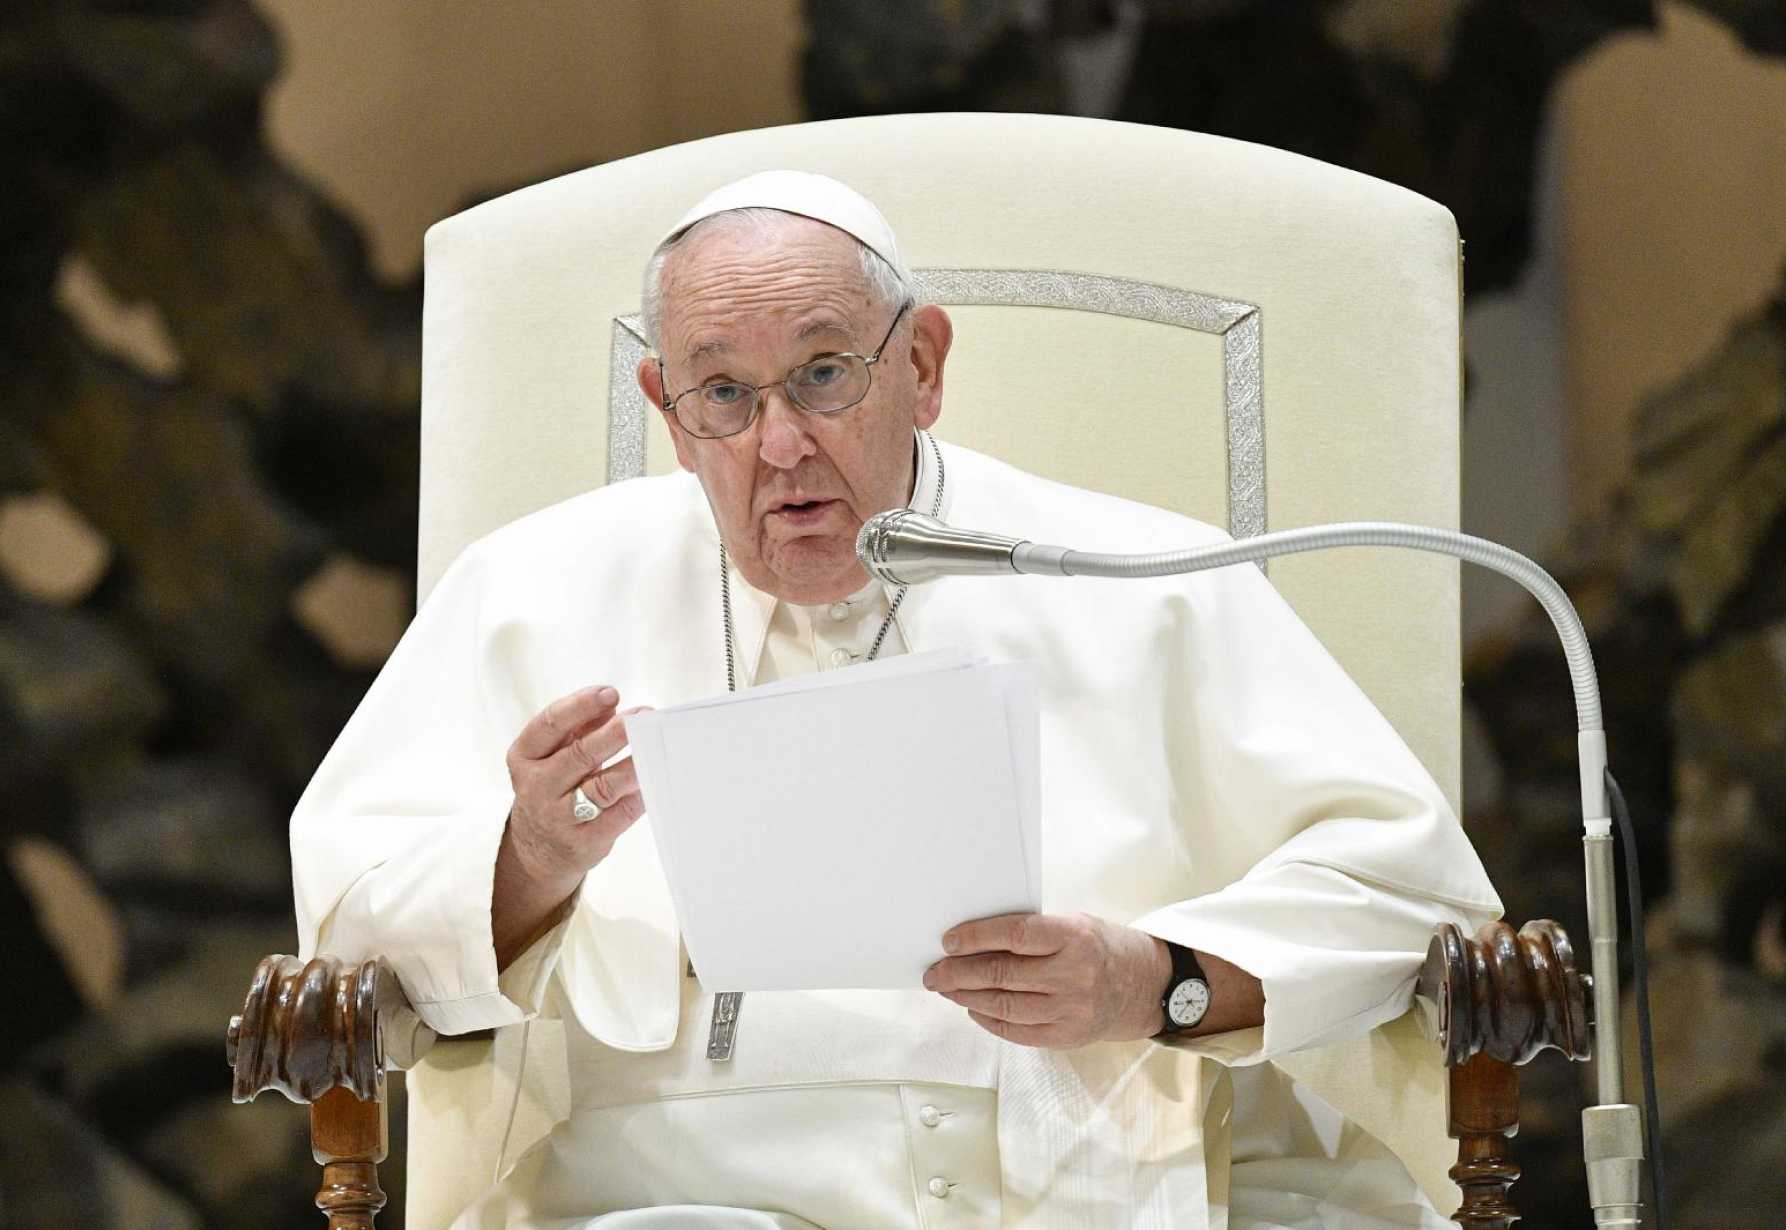 The Spirit helps the church avoid 'ideological divisions,' pope says